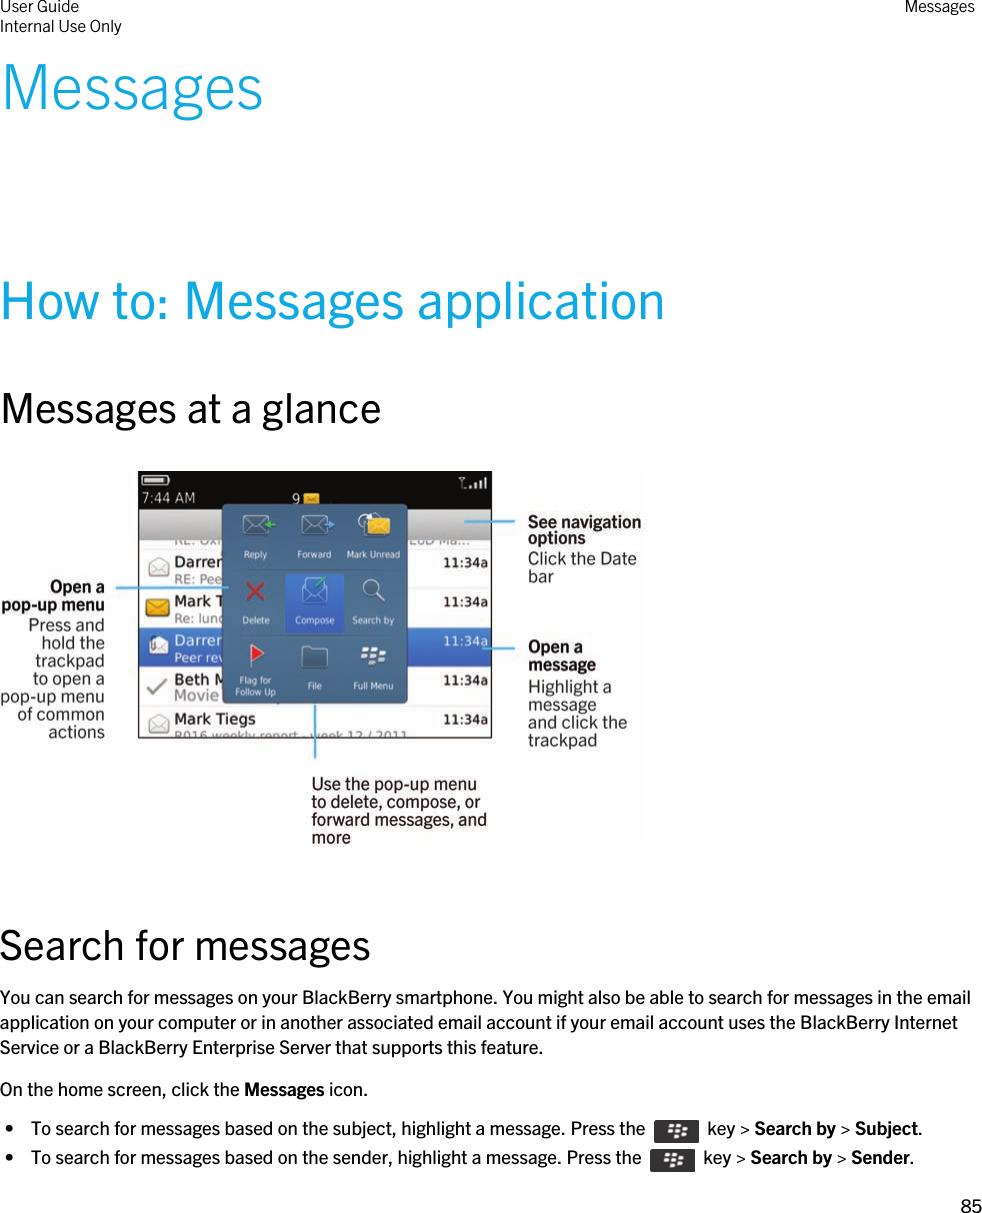 MessagesHow to: Messages applicationMessages at a glance  Search for messagesYou can search for messages on your BlackBerry smartphone. You might also be able to search for messages in the email application on your computer or in another associated email account if your email account uses the BlackBerry Internet Service or a BlackBerry Enterprise Server that supports this feature.On the home screen, click the Messages icon. •  To search for messages based on the subject, highlight a message. Press the    key &gt; Search by &gt; Subject. •  To search for messages based on the sender, highlight a message. Press the    key &gt; Search by &gt; Sender.User GuideInternal Use Only Messages85 